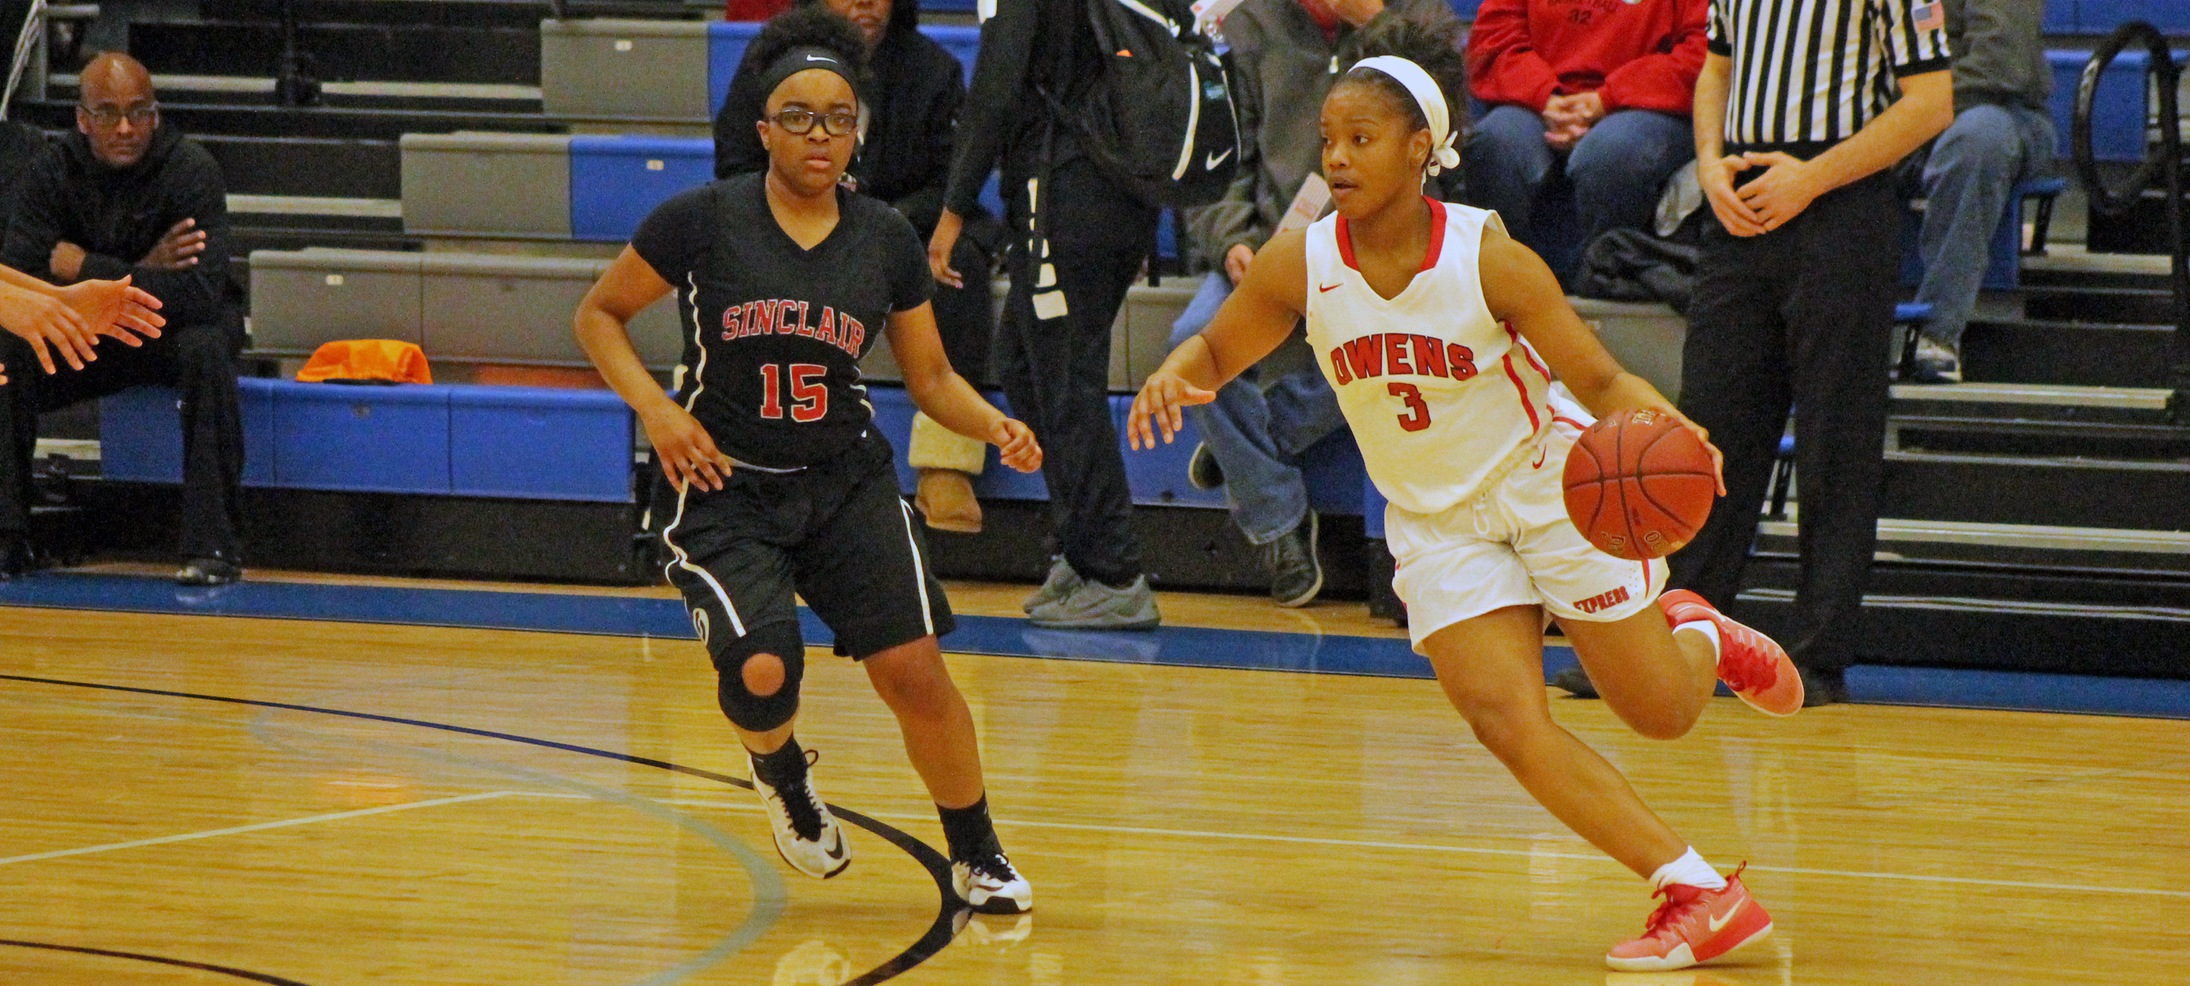 Essence Cowan looks to make a move against Sinclair's Reanna Dudley in today's district semifinal game. Photo by Nicholas Huenefeld/Owens Sports Information